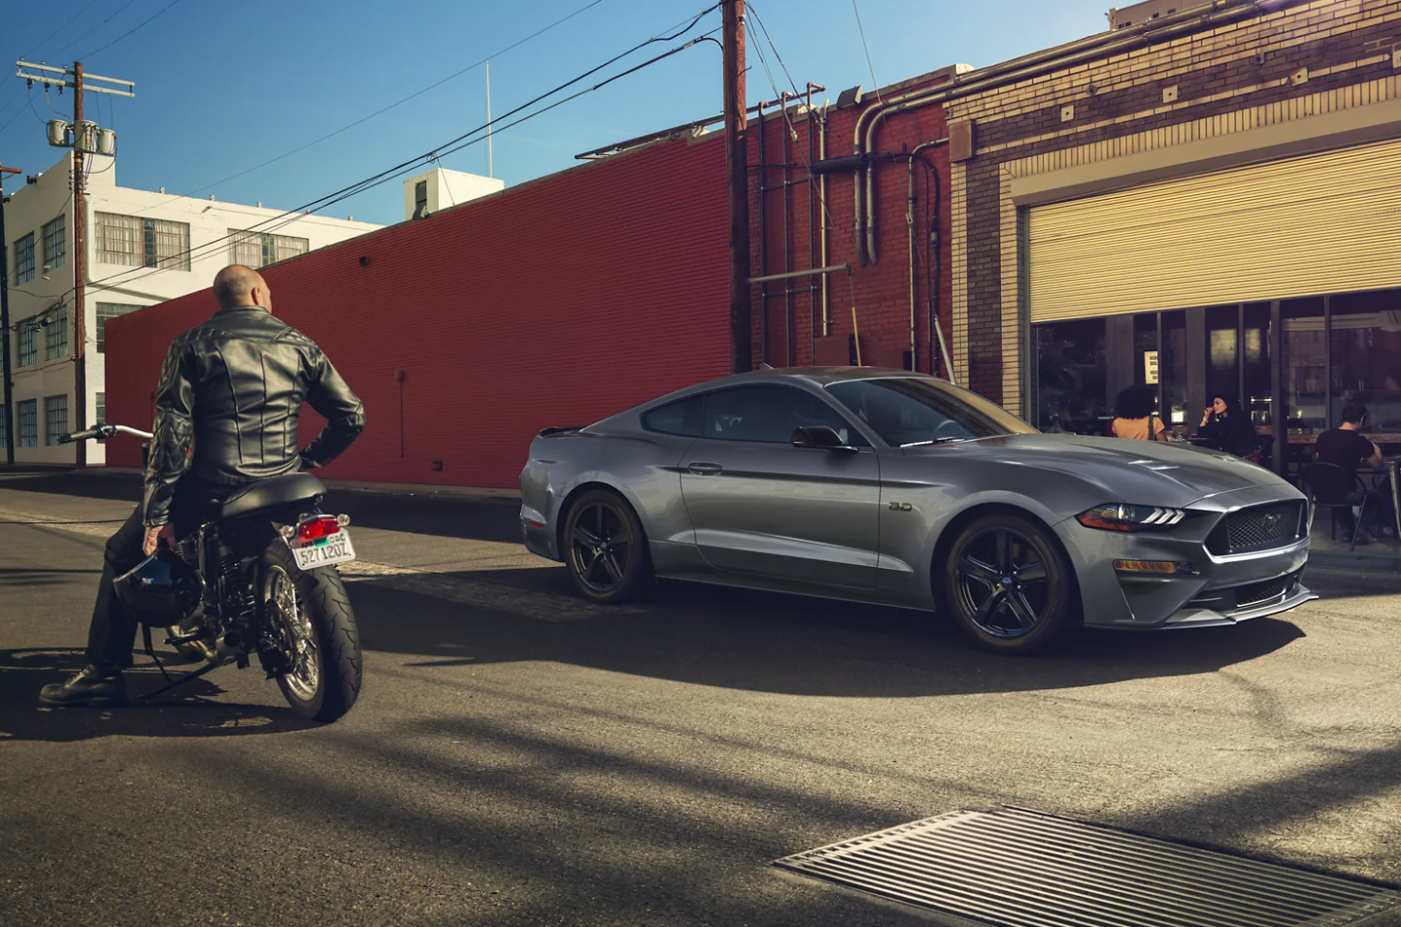 A metallic gray 2023 Ford Mustang Mach 1 sits at a stop on a city street